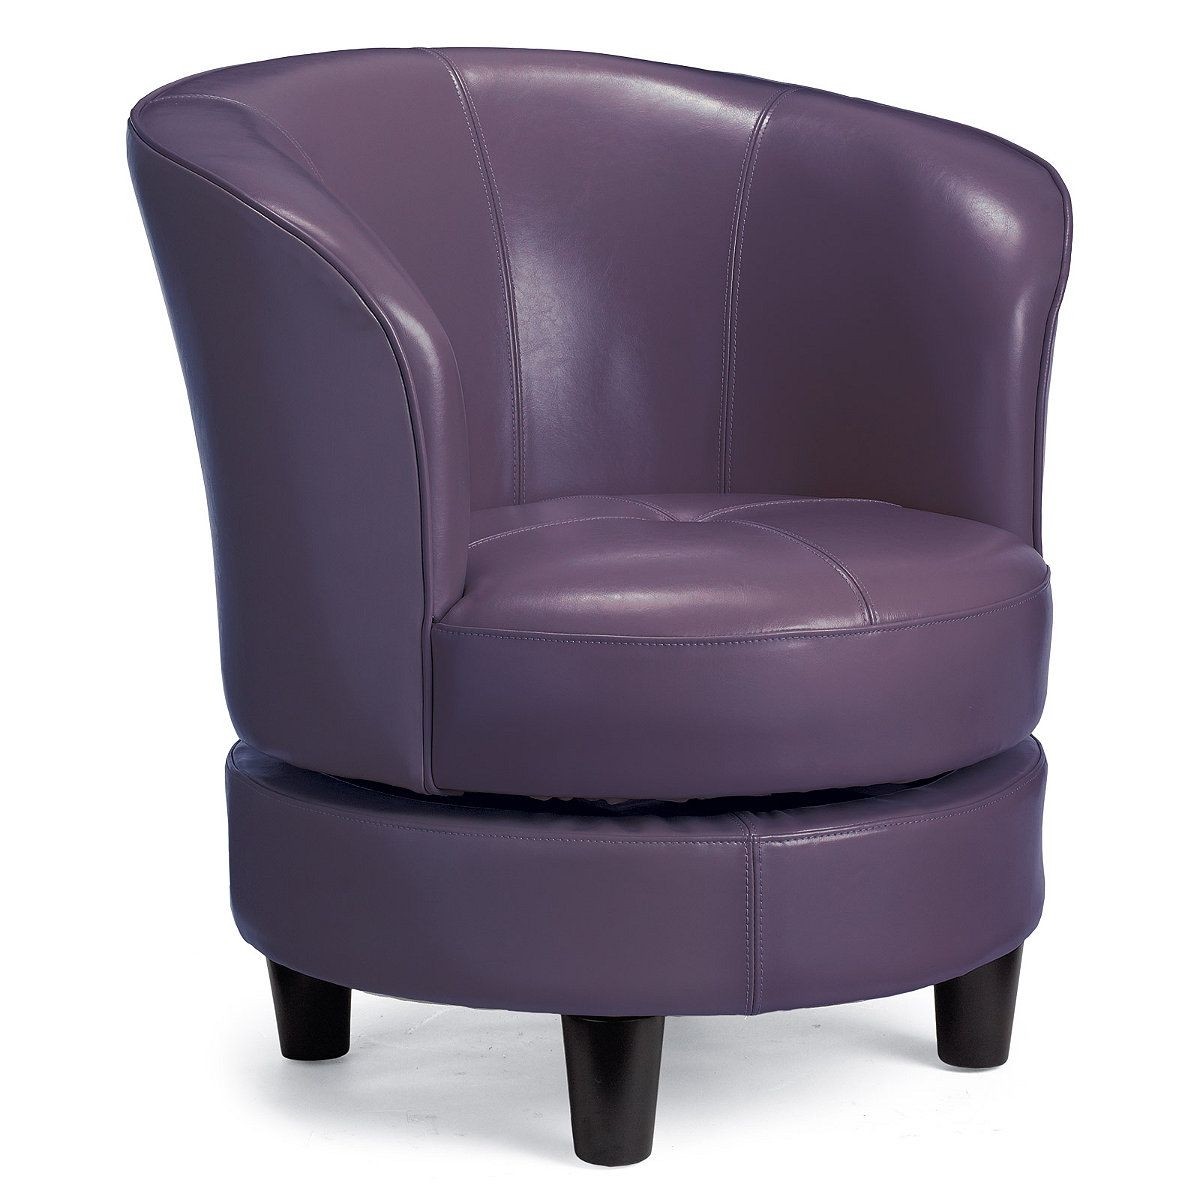 Blue leather swivel chair